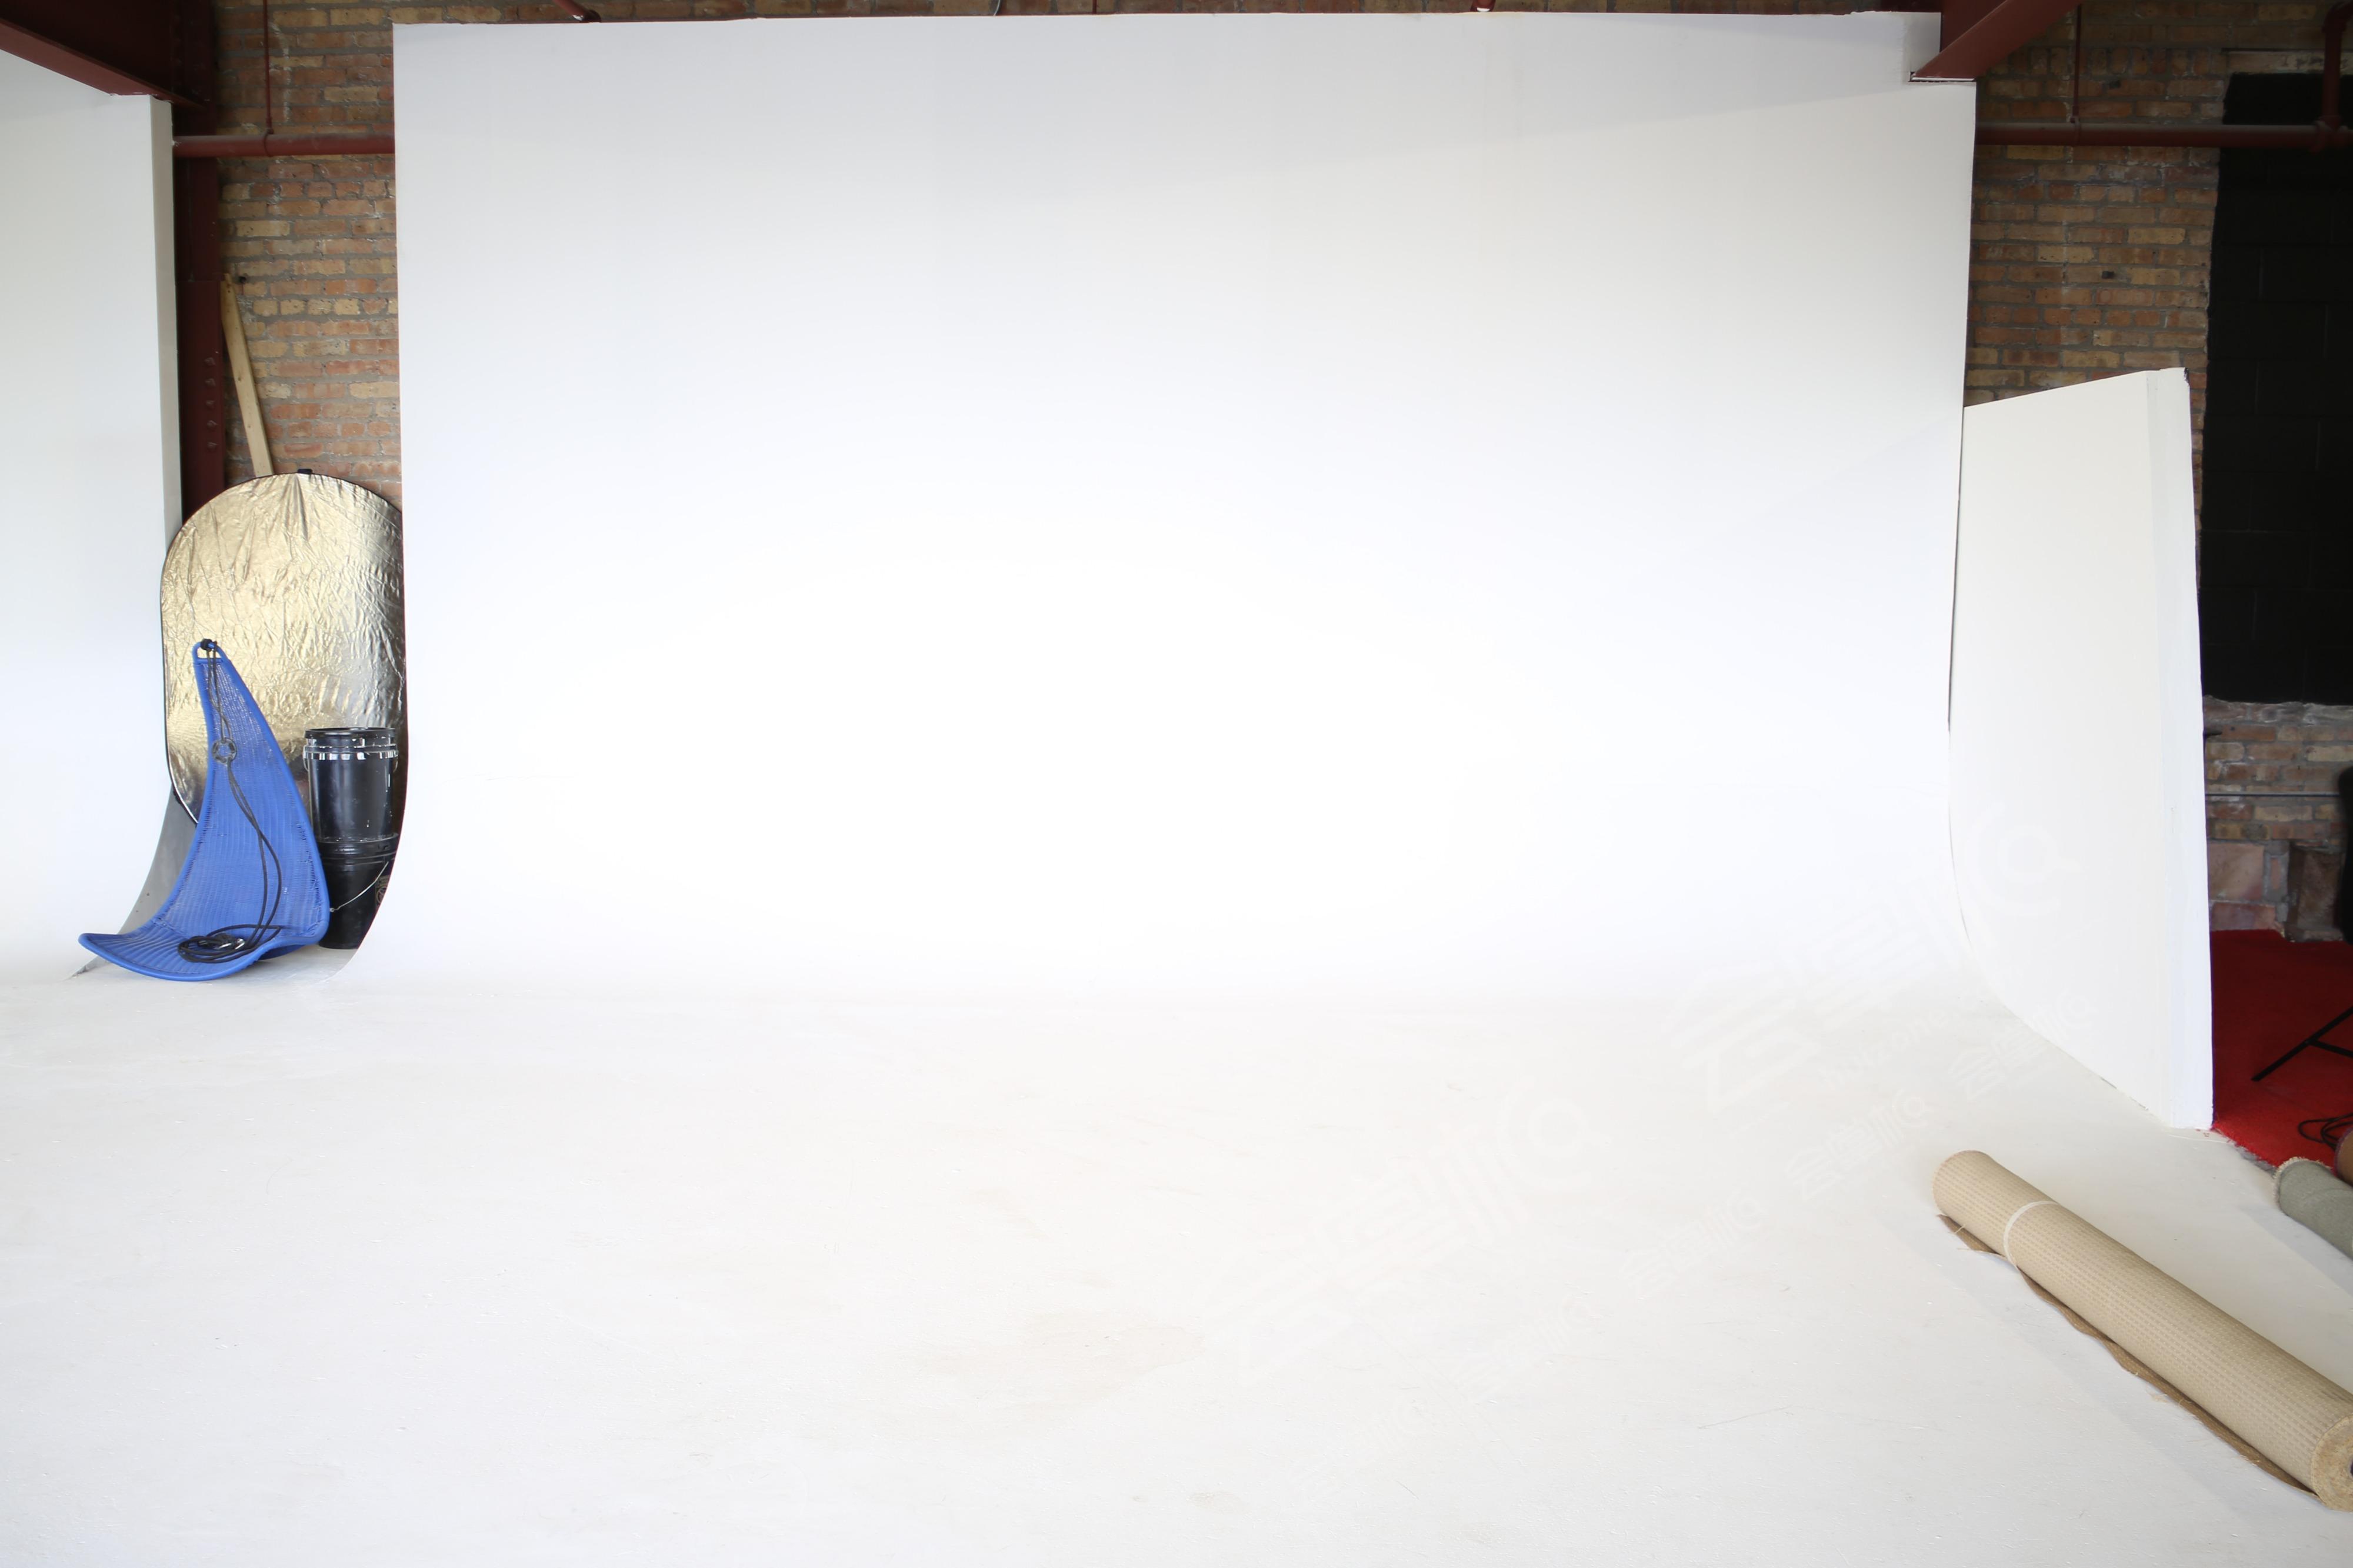 Photography and Video Loft Studio with Great Natural Lighting